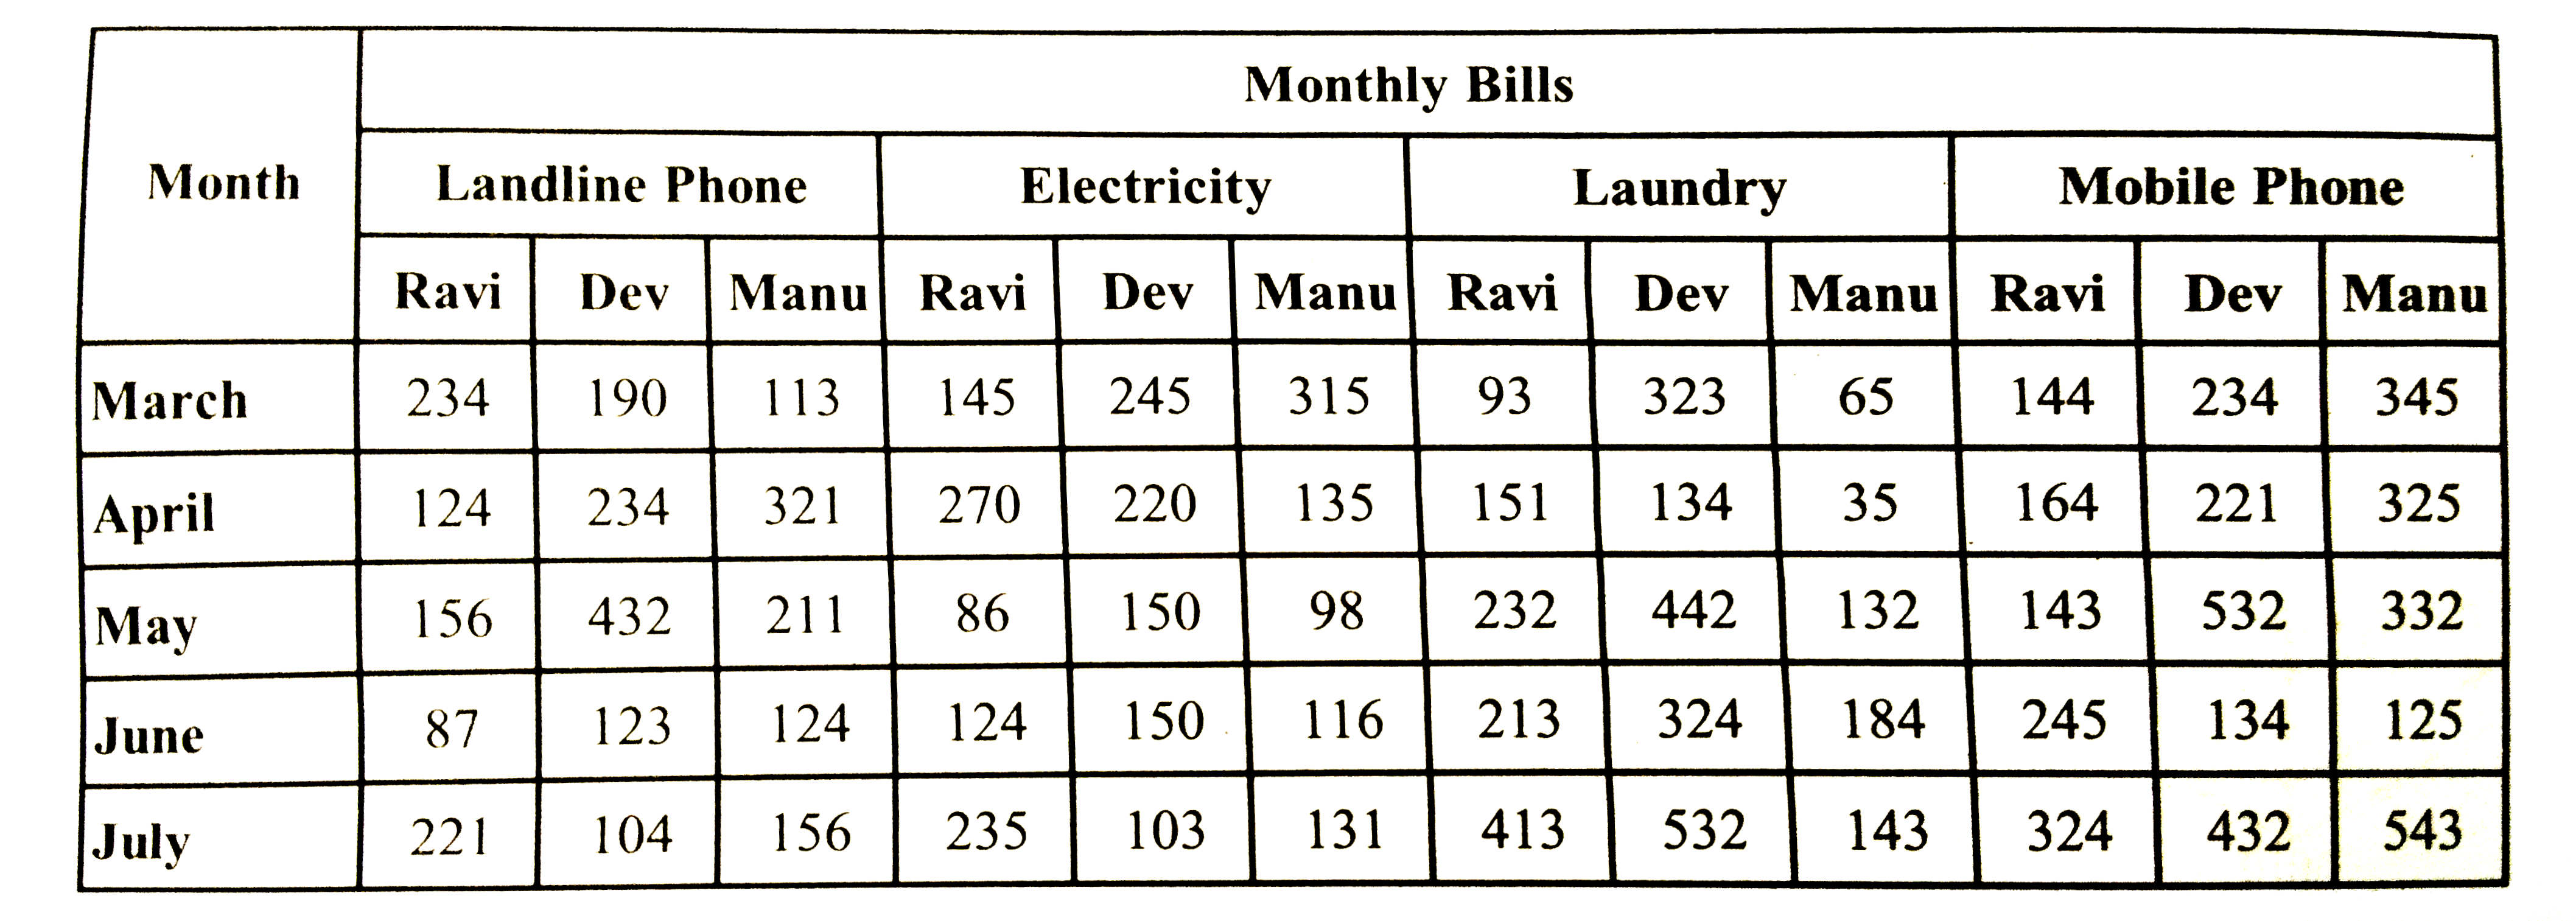 What is the total amount of bill paid by Dev in the month of June for all the four commodities ?